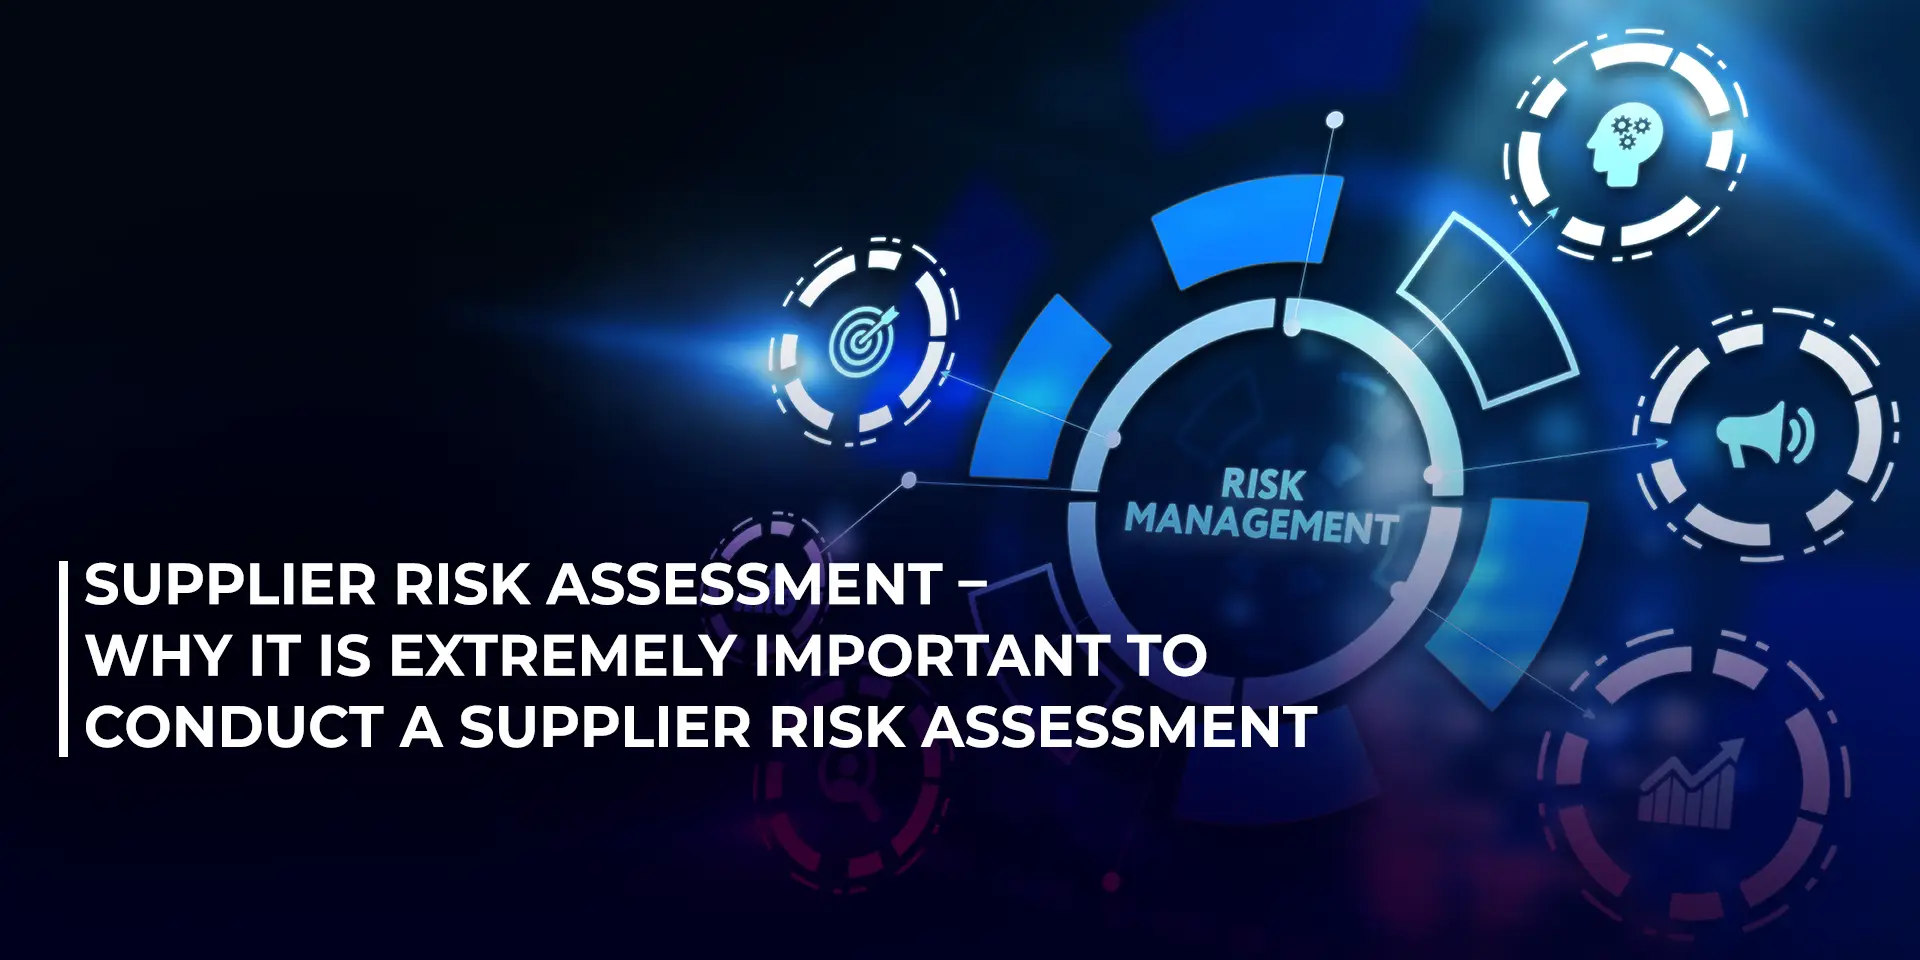 Supplier Risk Assessment Why it is extremely important to conduct a supplier risk assessment